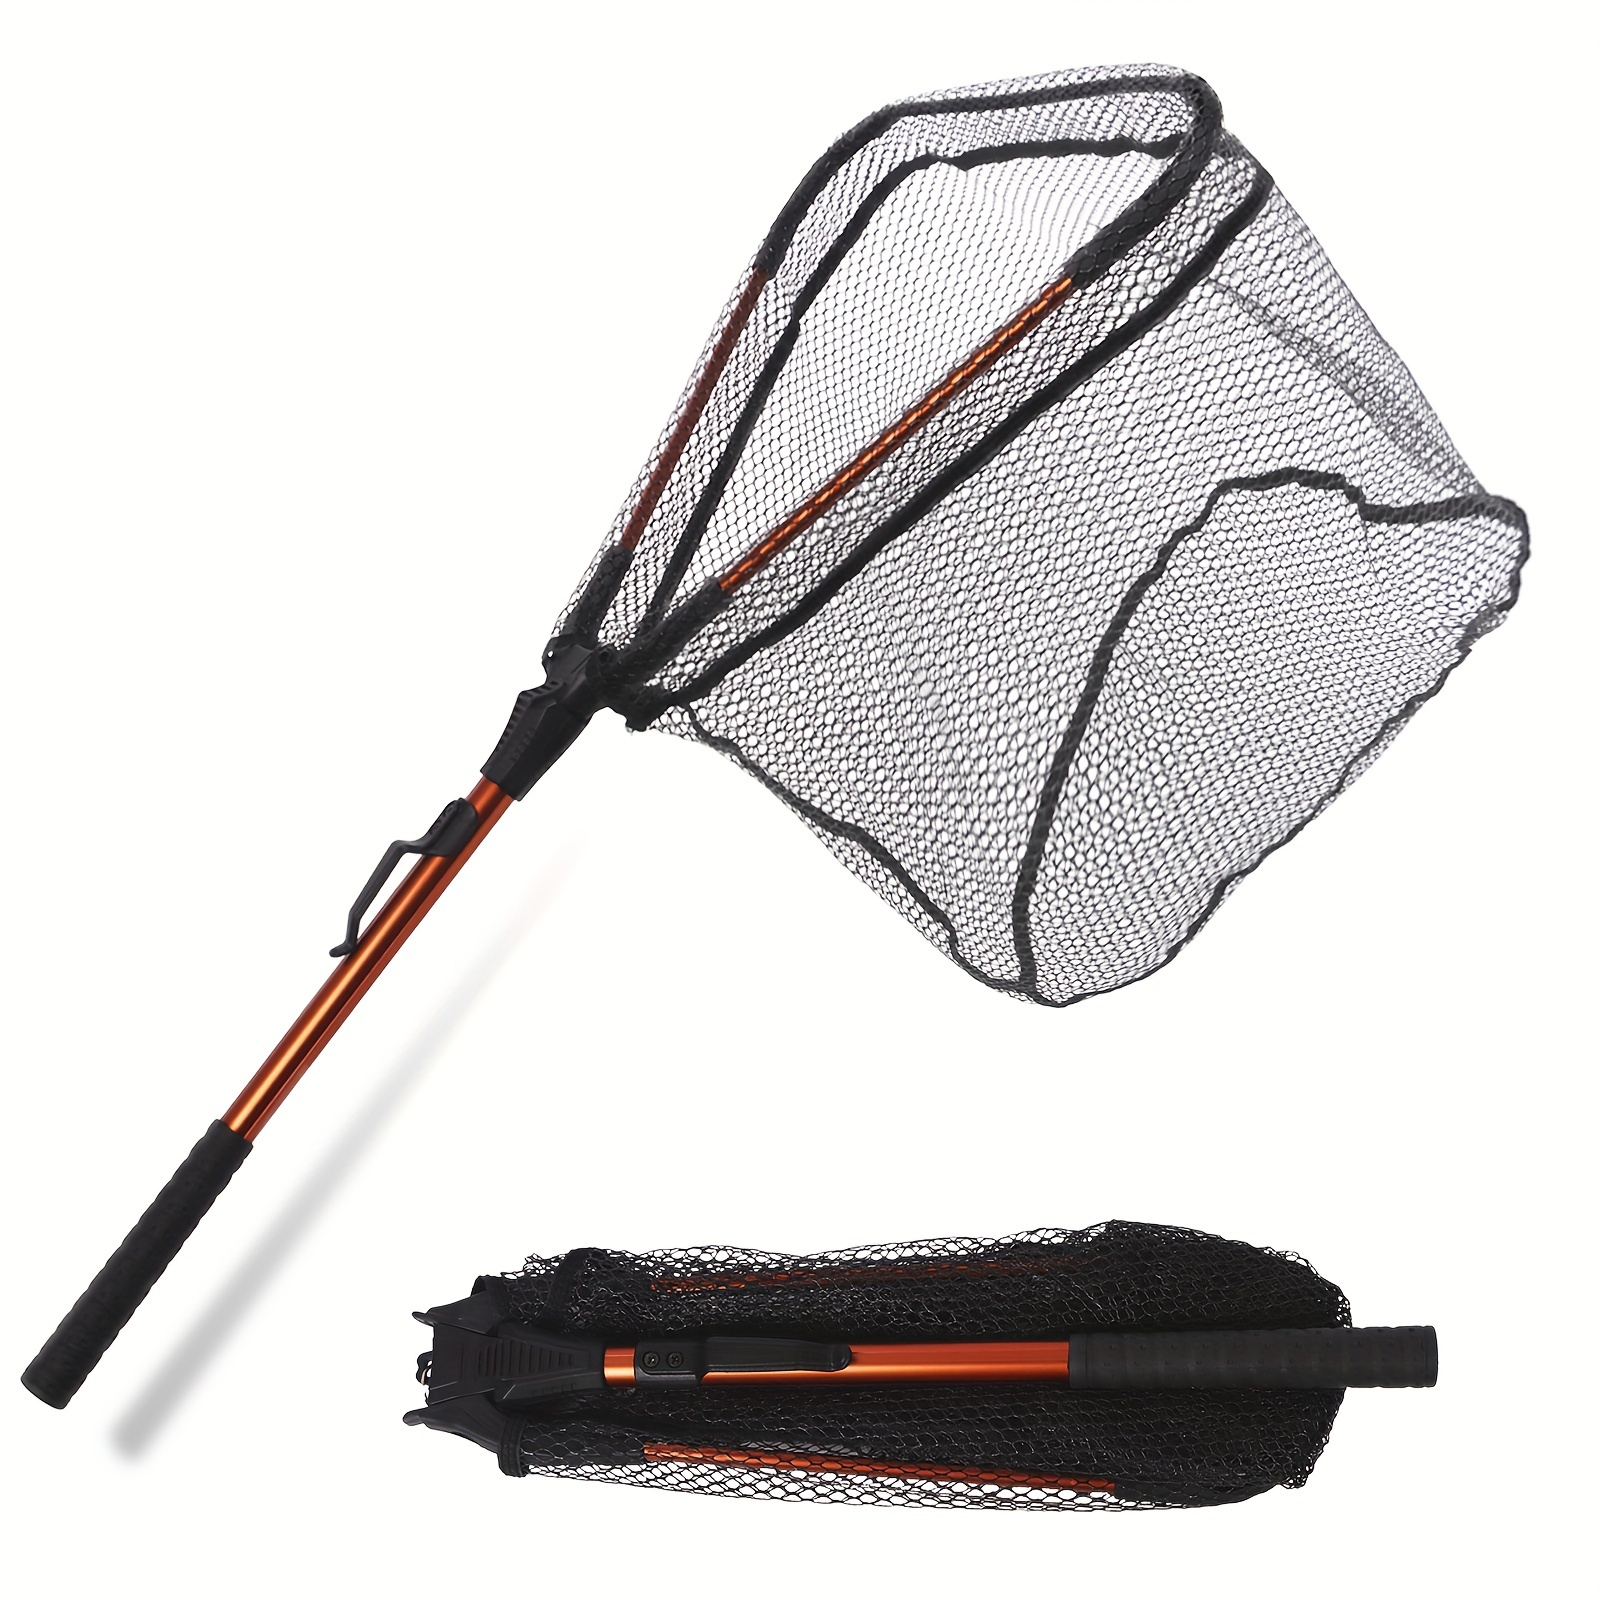 1pc * Collapsible Fishing Net with Telescopic Handle - Durable Rubber  Coating and Knotless Mesh for Safe Fish Catching and Releasing